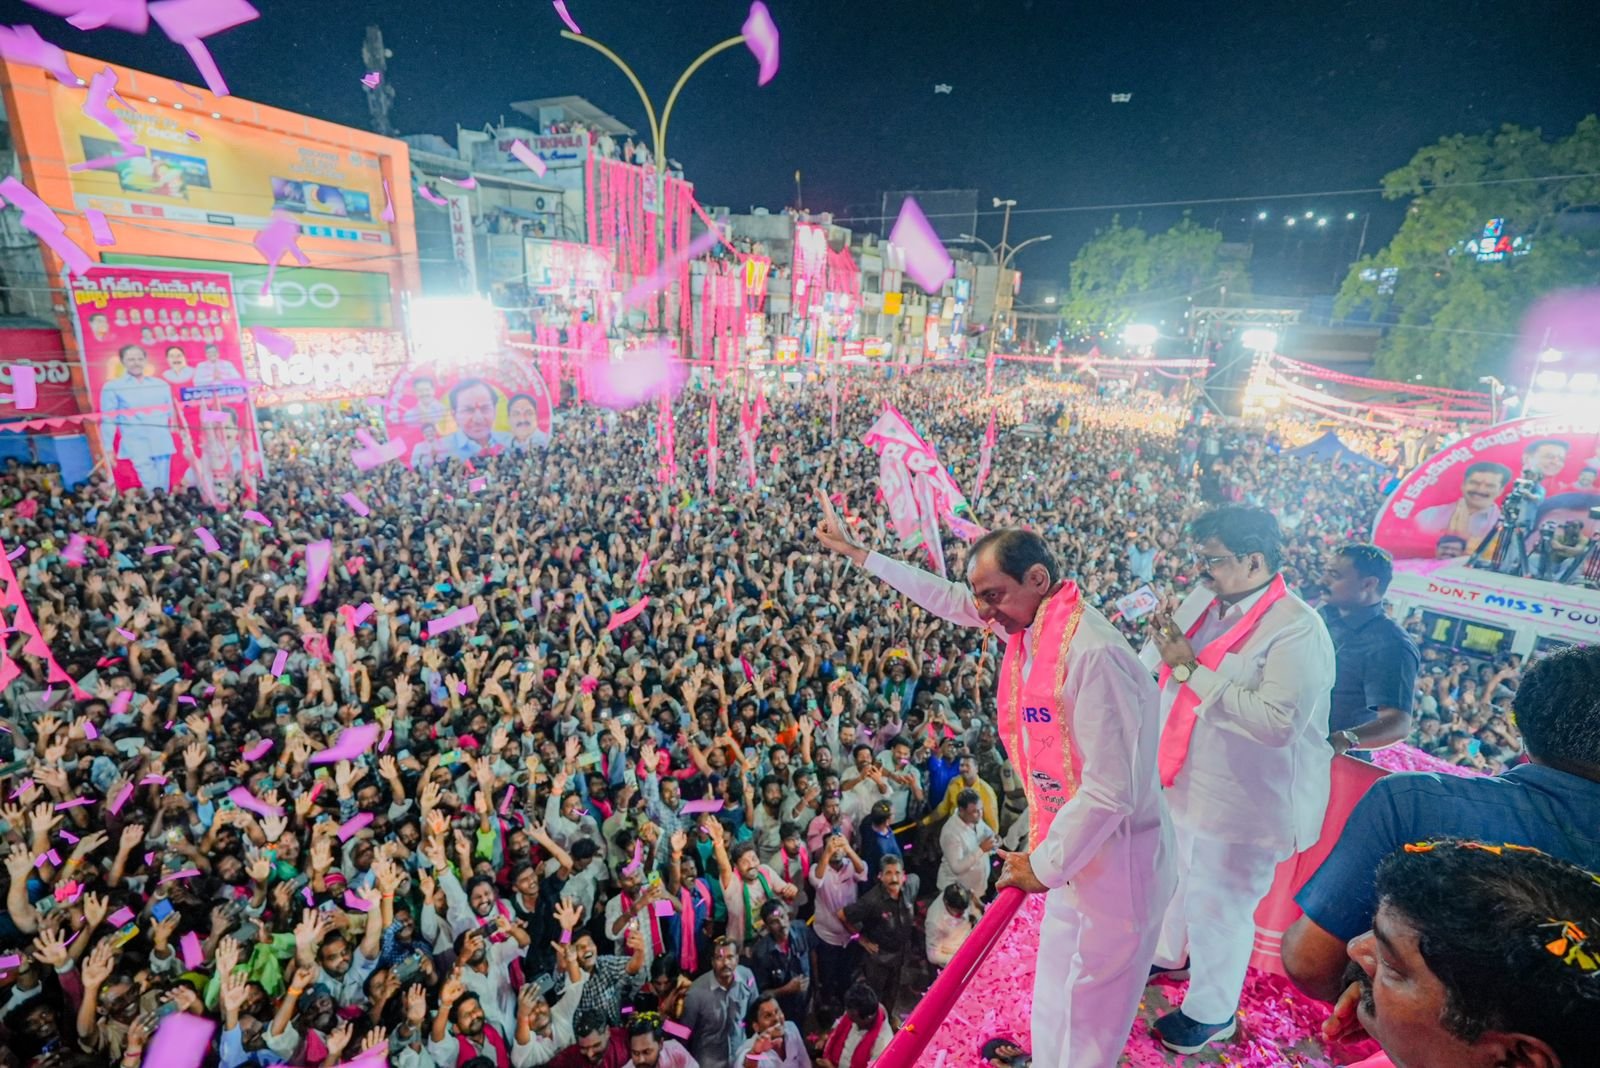 KCR Predicts Bypolls for Station Ghanpur, Asks People to Elect at least 14 BRS MPs